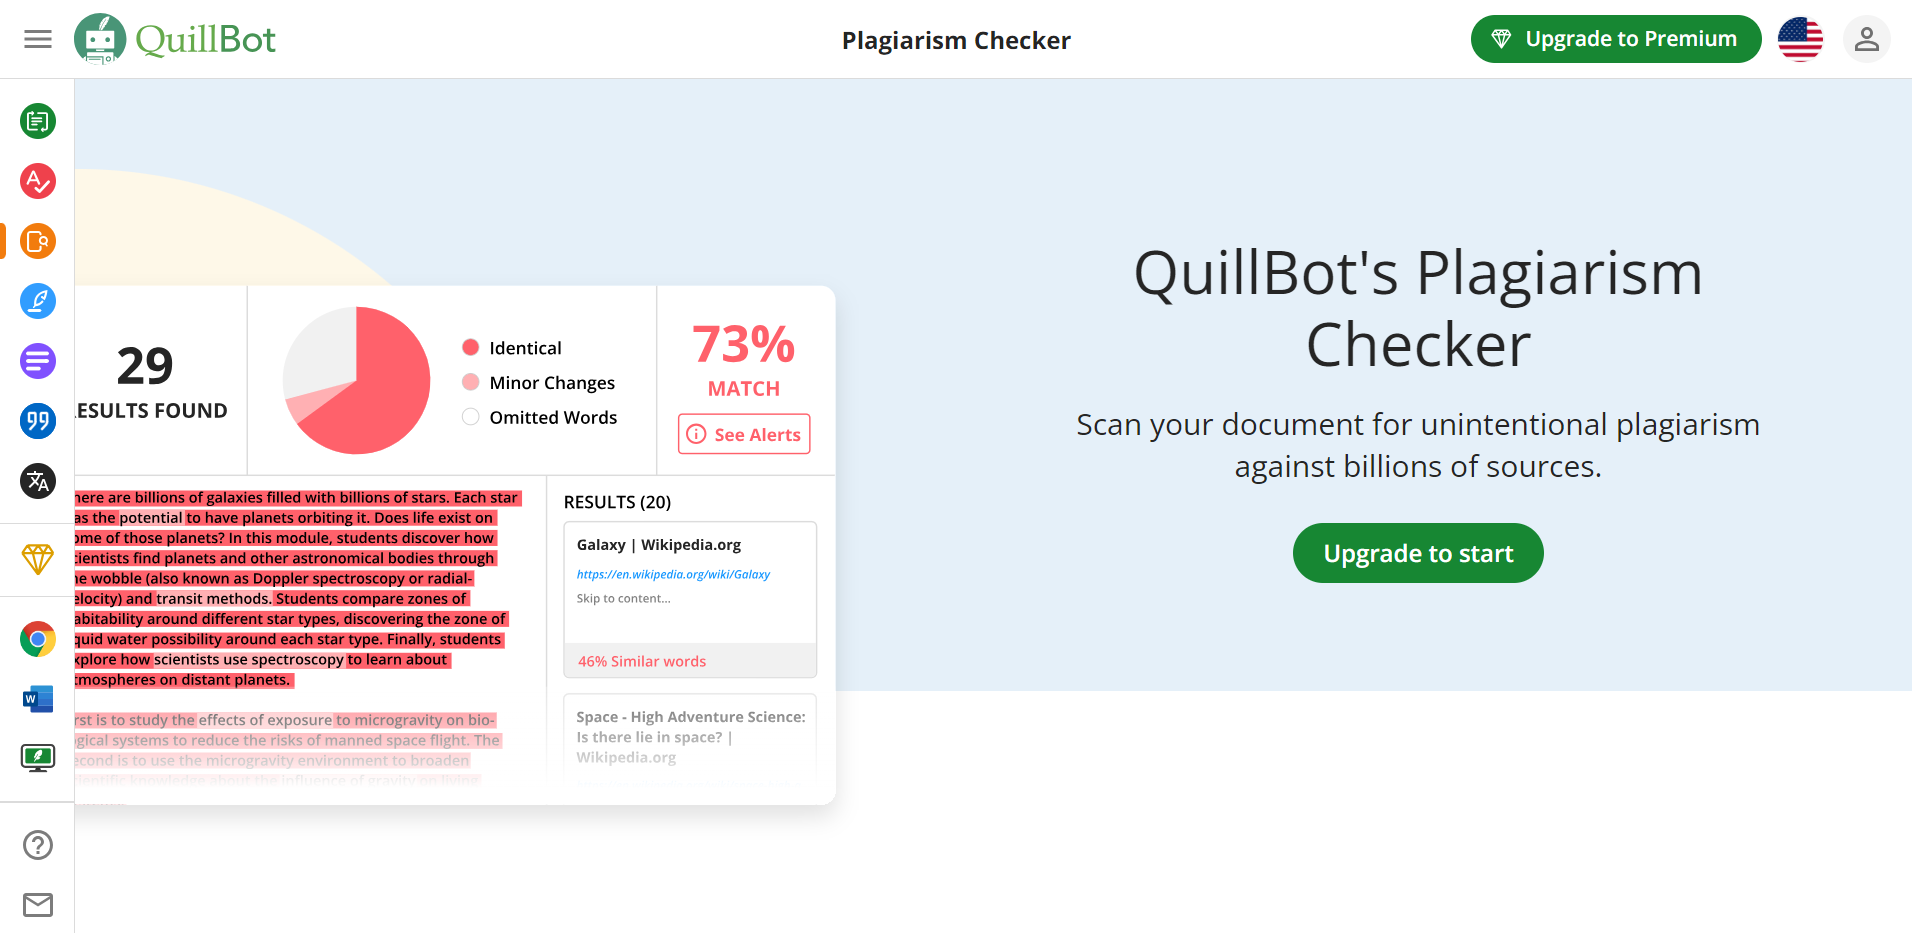 Plagiarism Protection: Evaluating the Effectiveness of QuillBot’s Checker